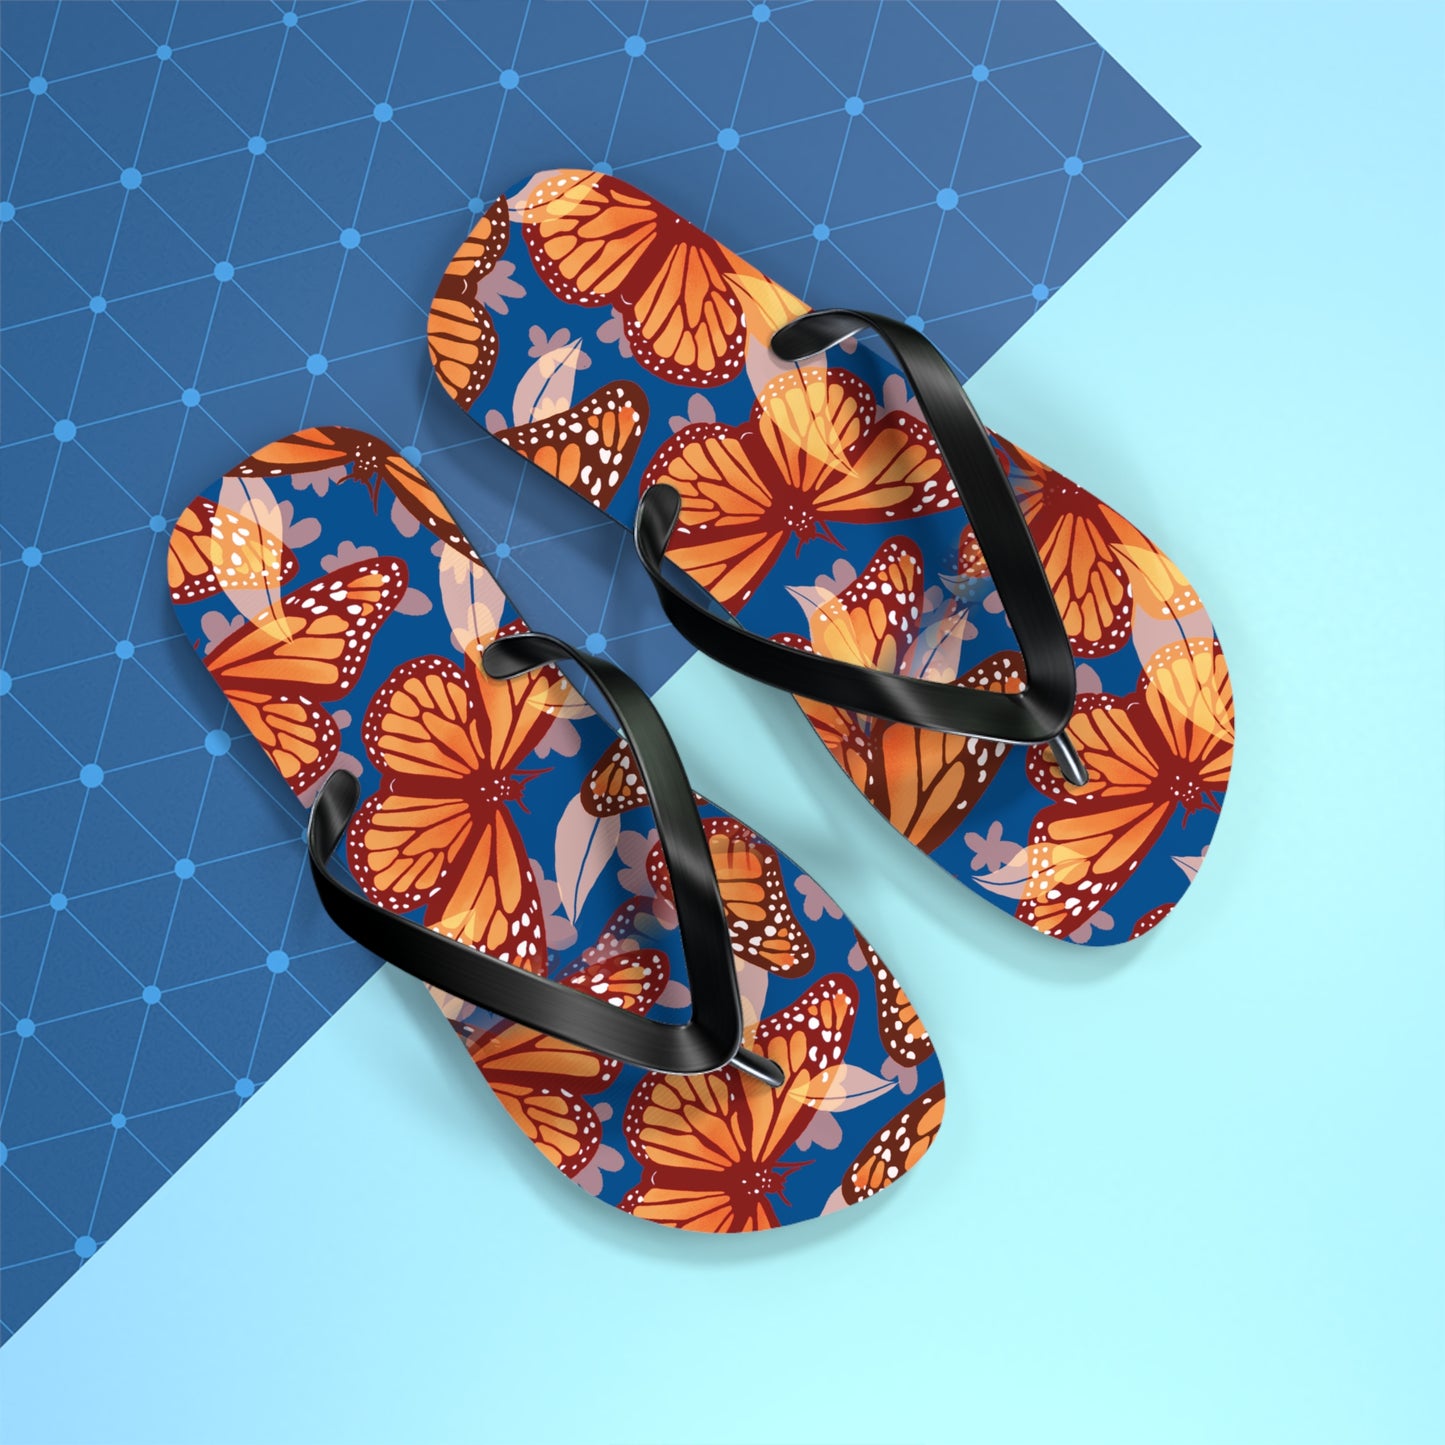 Flip Flops All-day comfort, Slippers, colorful, With an easy slip-on design, a cushioned footbed. Mixed colors butterfly